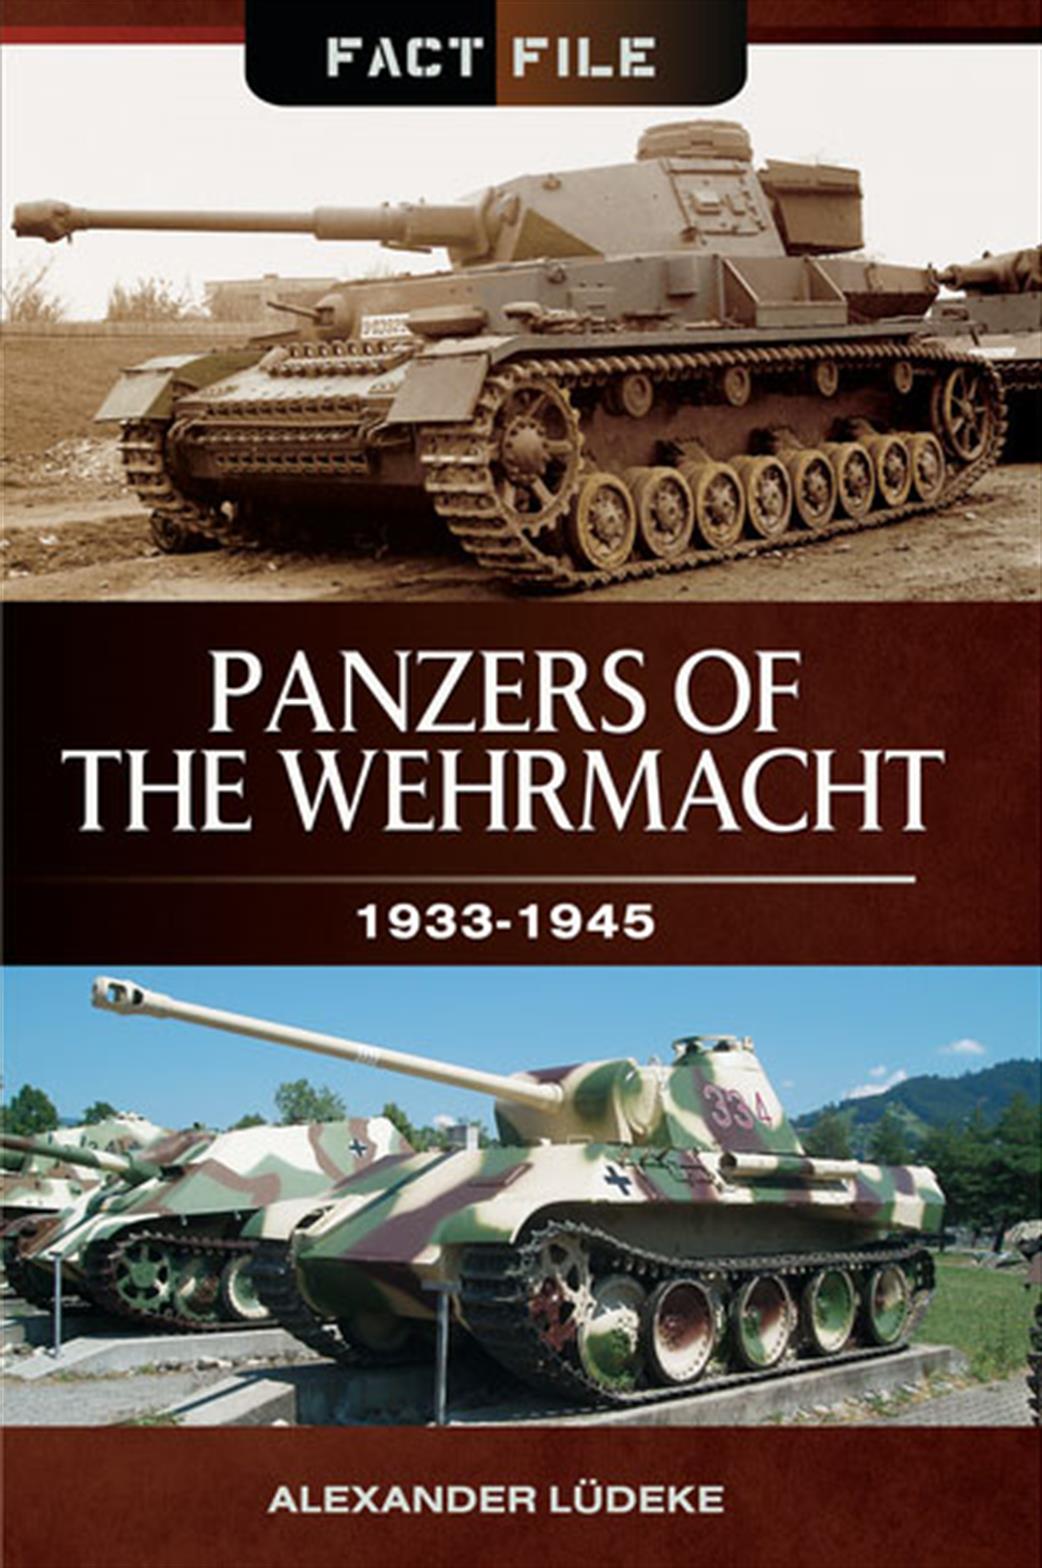 Pen & Sword  9781473823976 Panzers of The Wehrmacht 1933-1945 fact File Book Alexander Ludeke